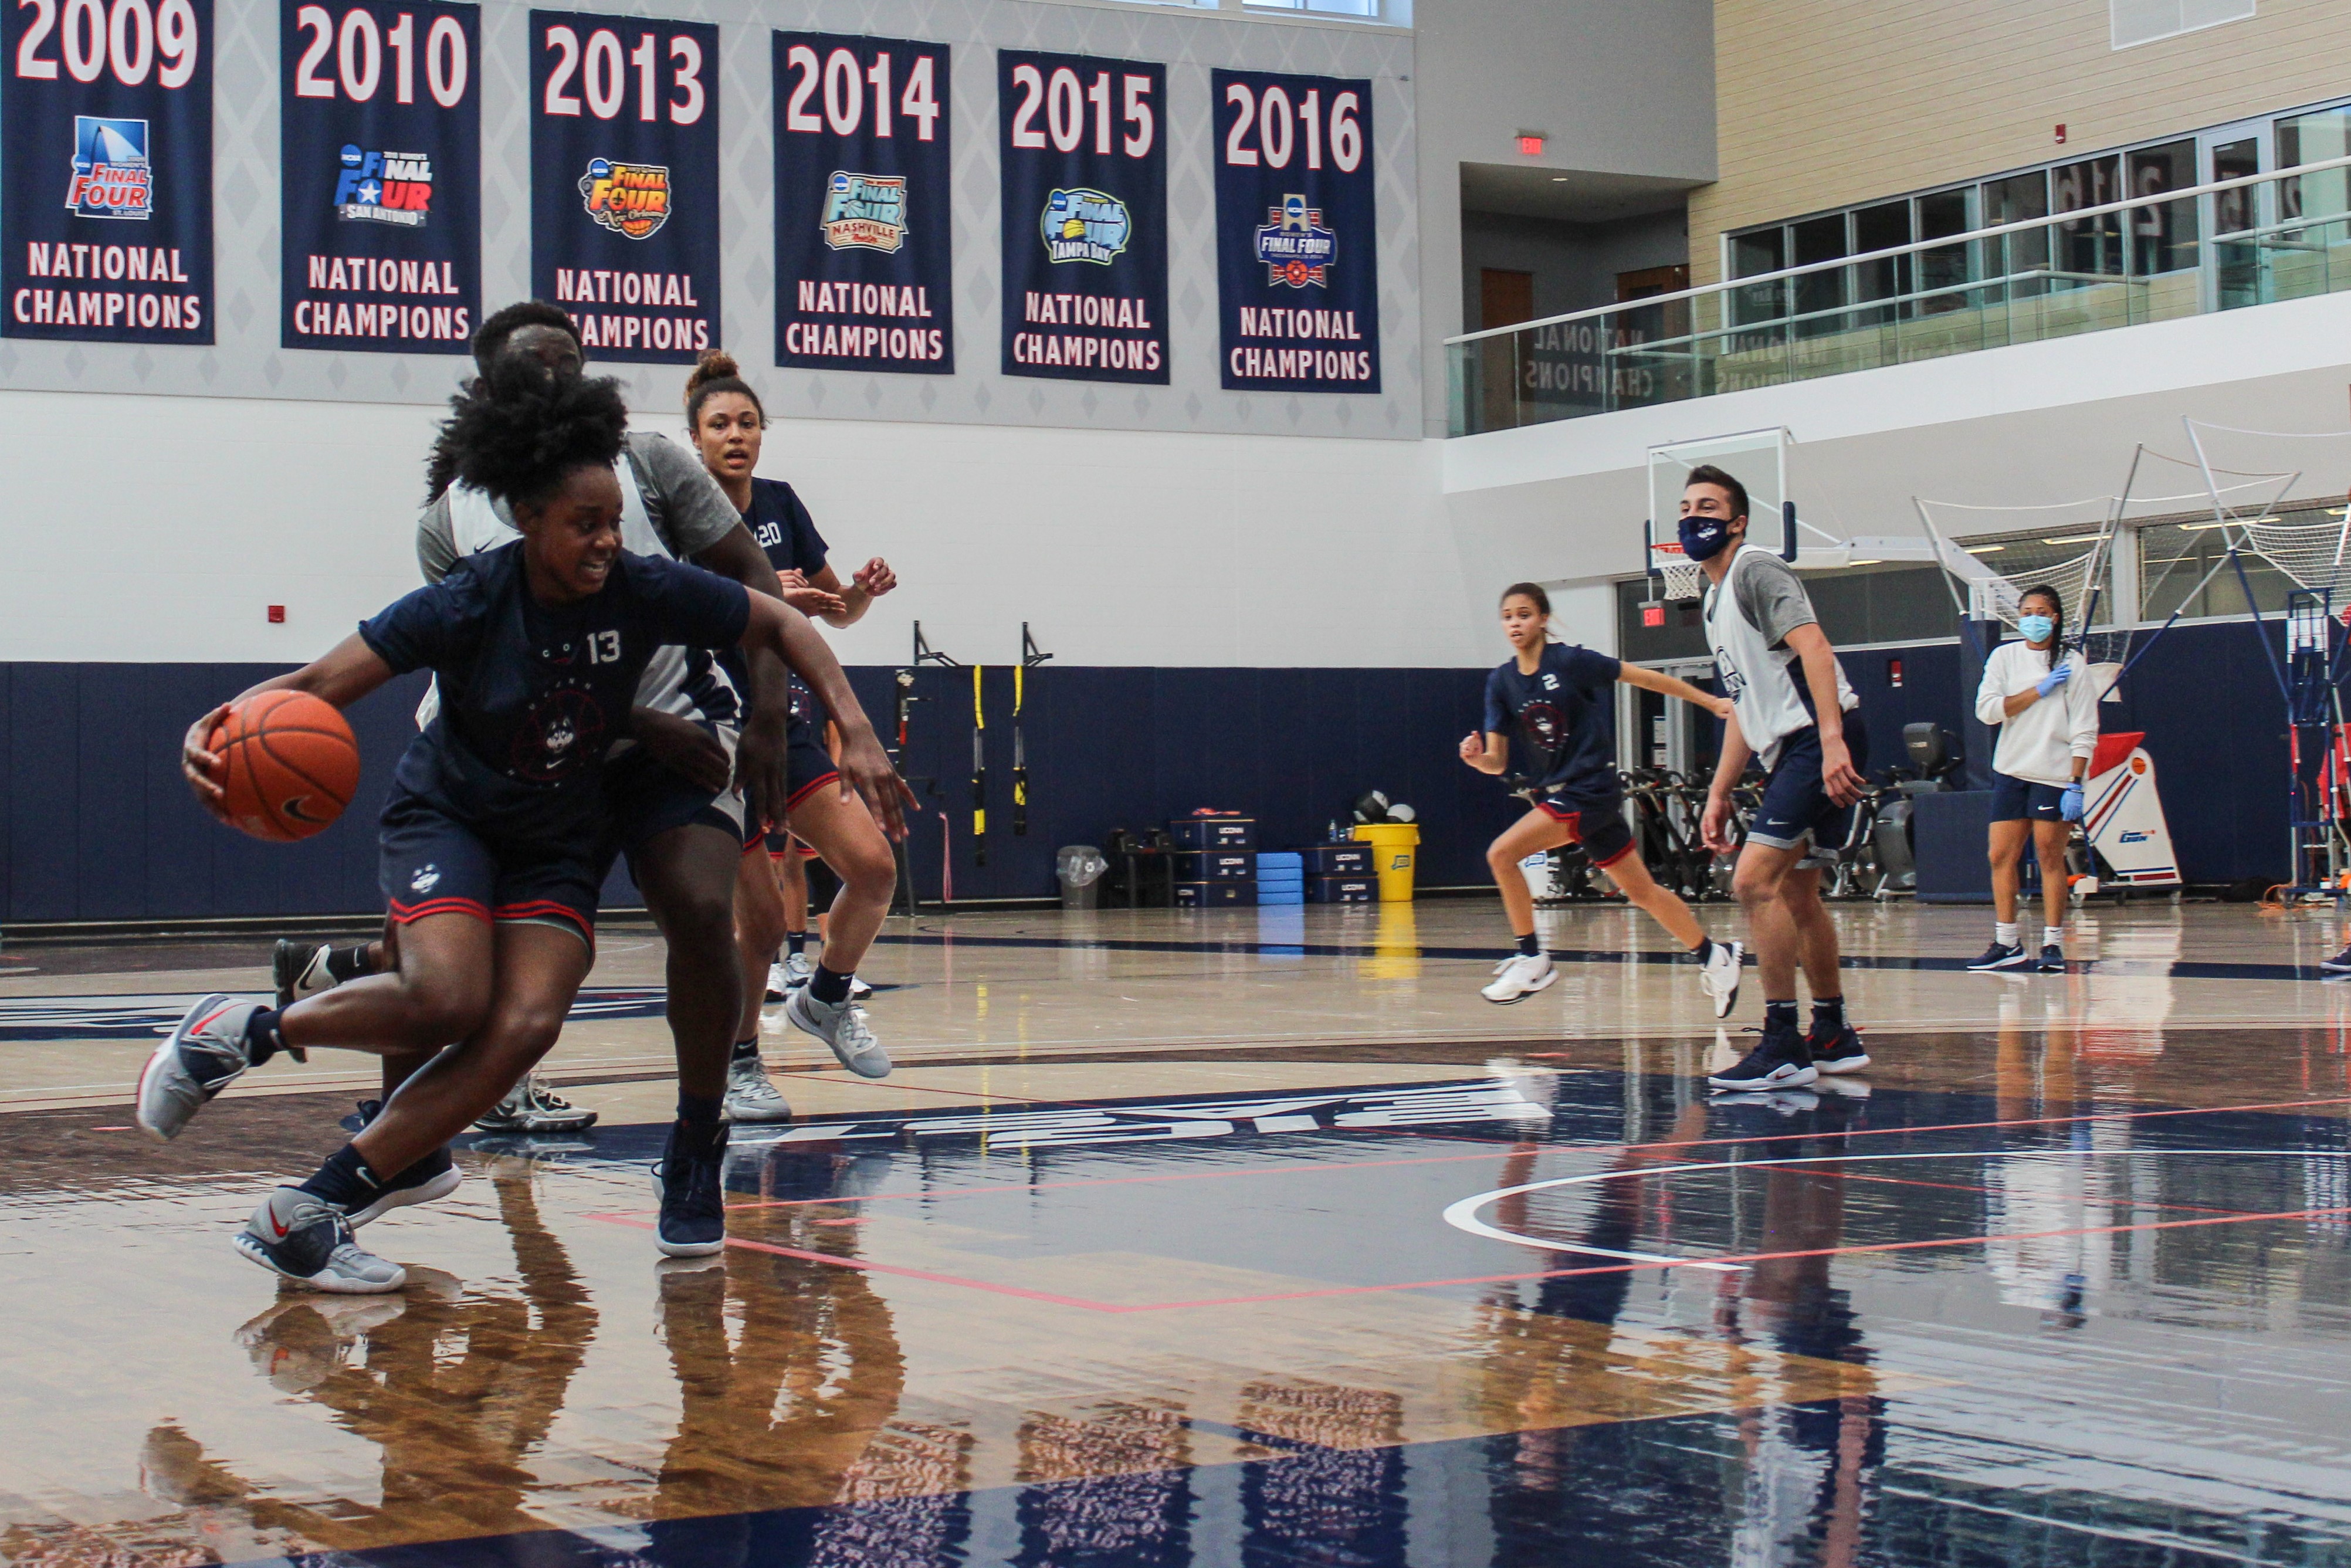 The UConn women's basketball team practicing ahead of the start of their season, which was delayed by the pandemic.